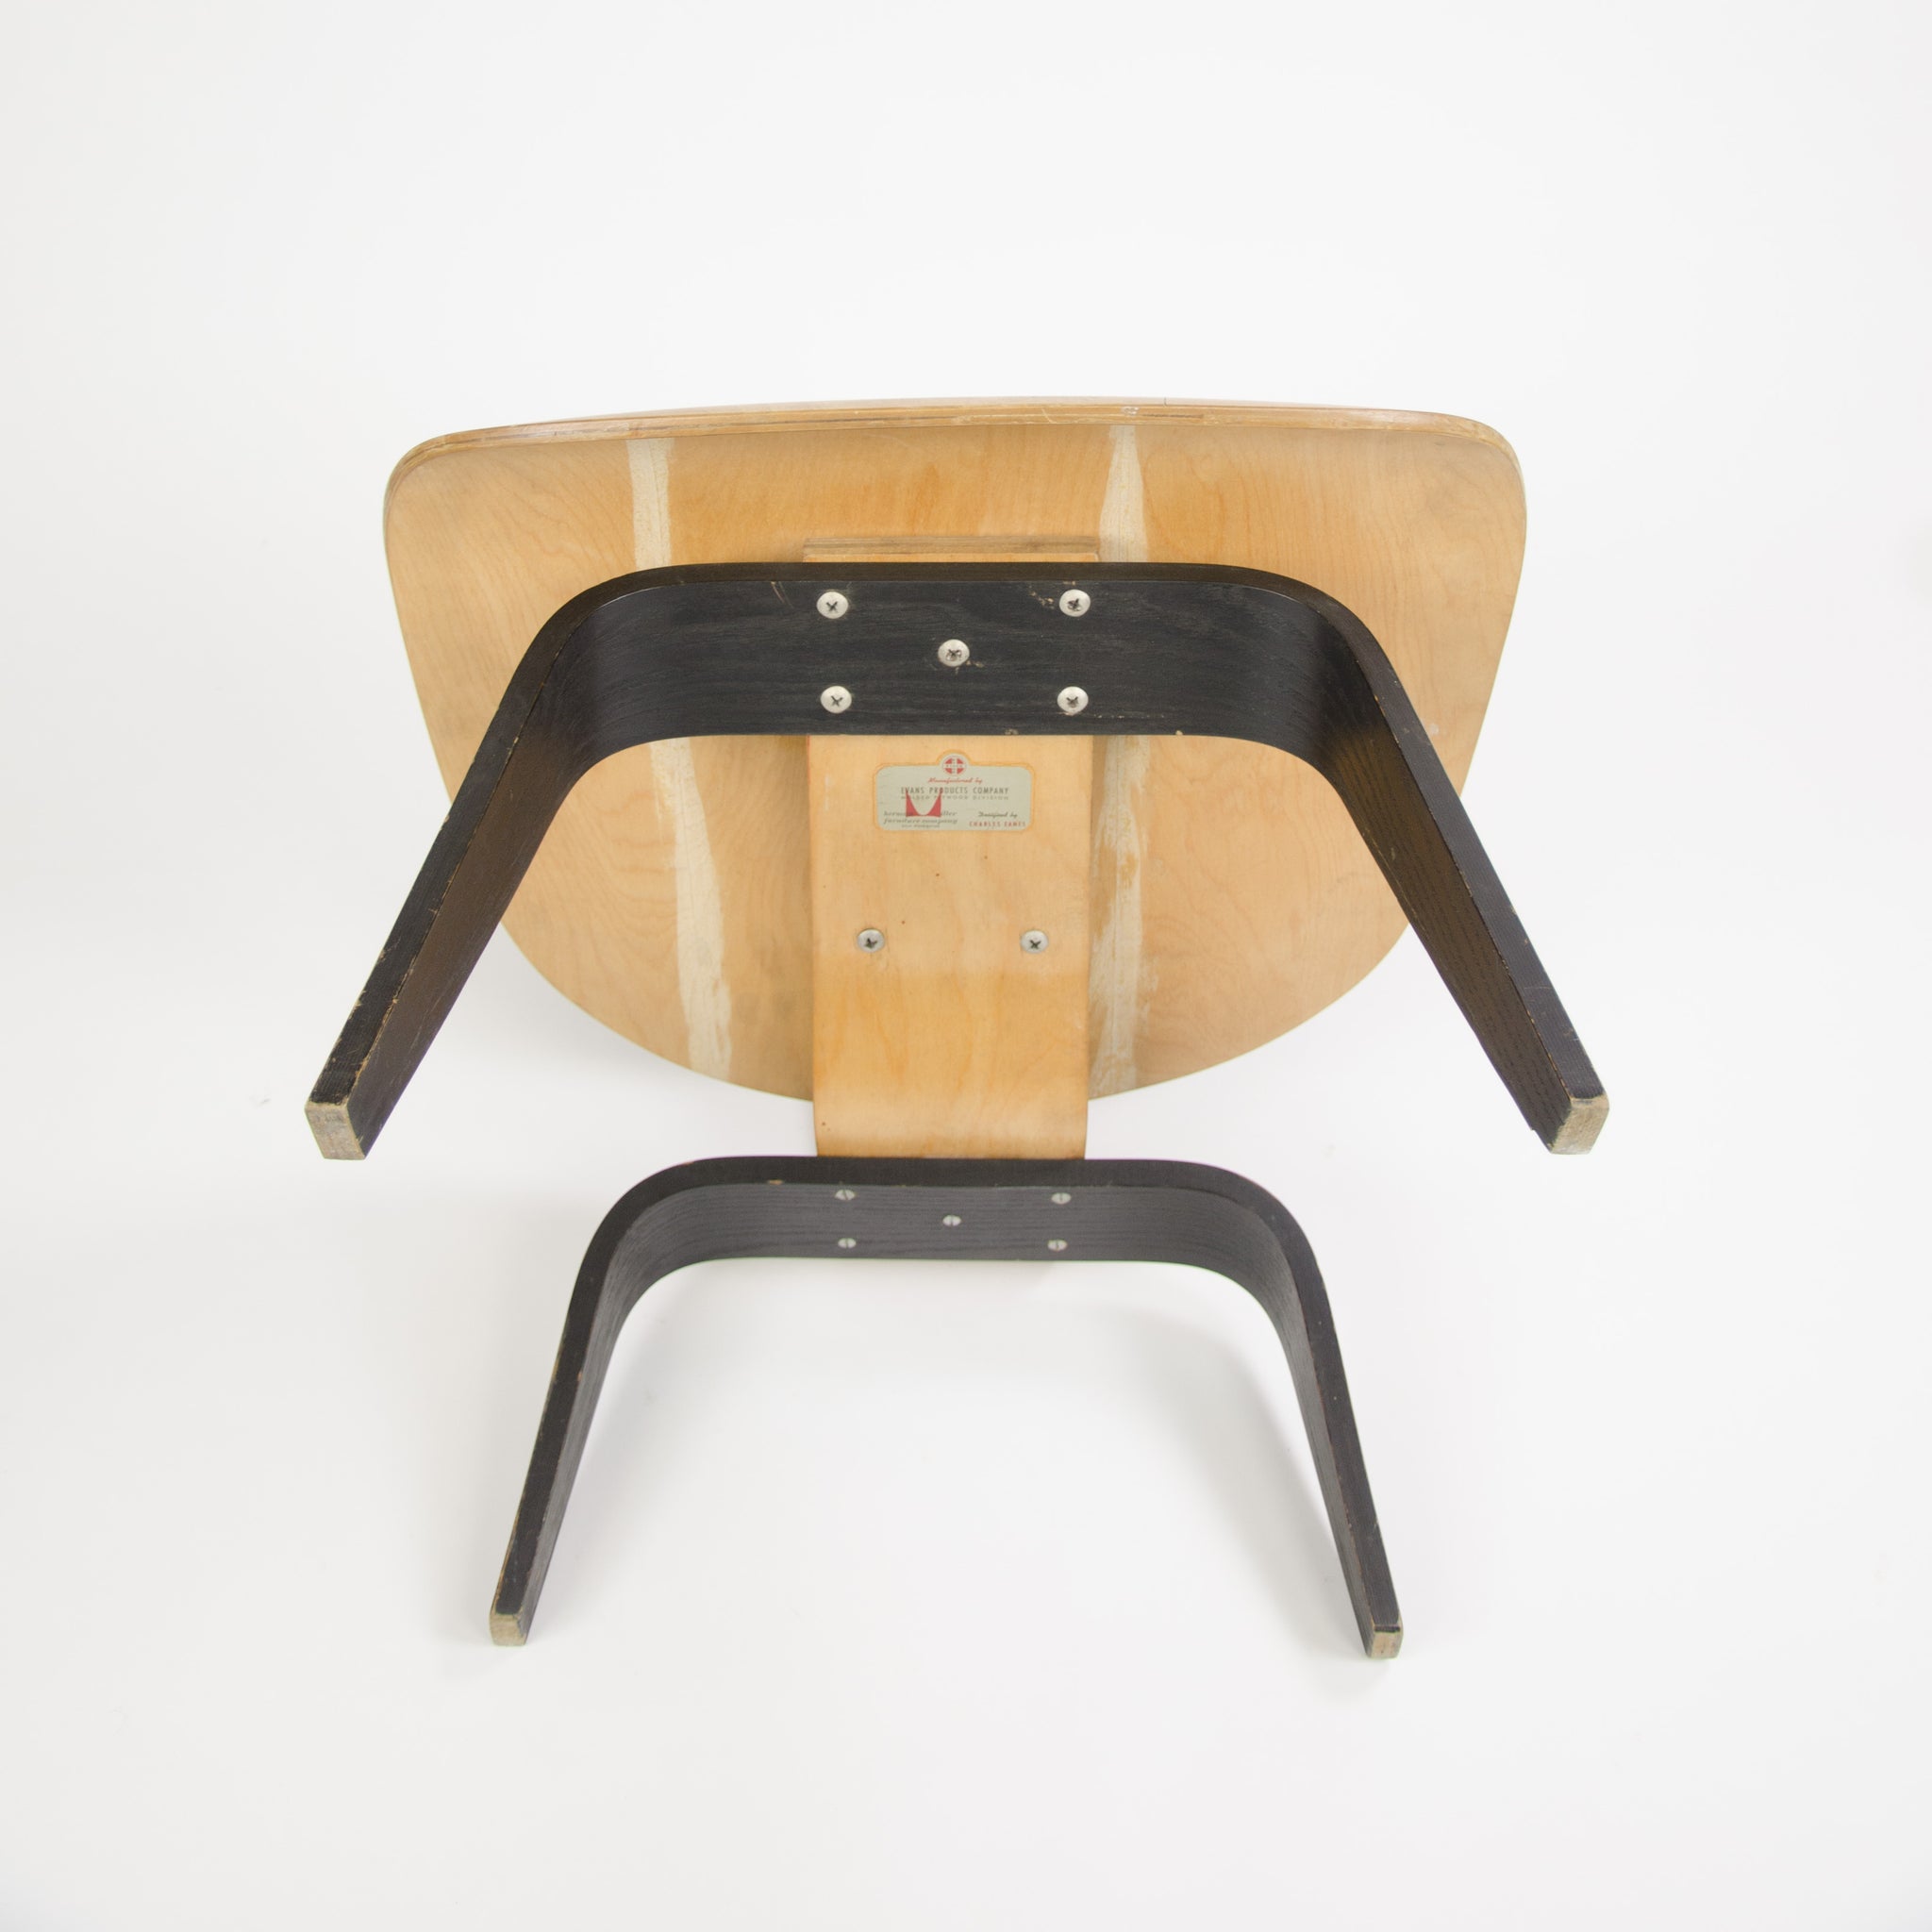 SOLD Eames Evans Herman Miller 1947 LCW Plywood Lounge Chair Original Museum Quality